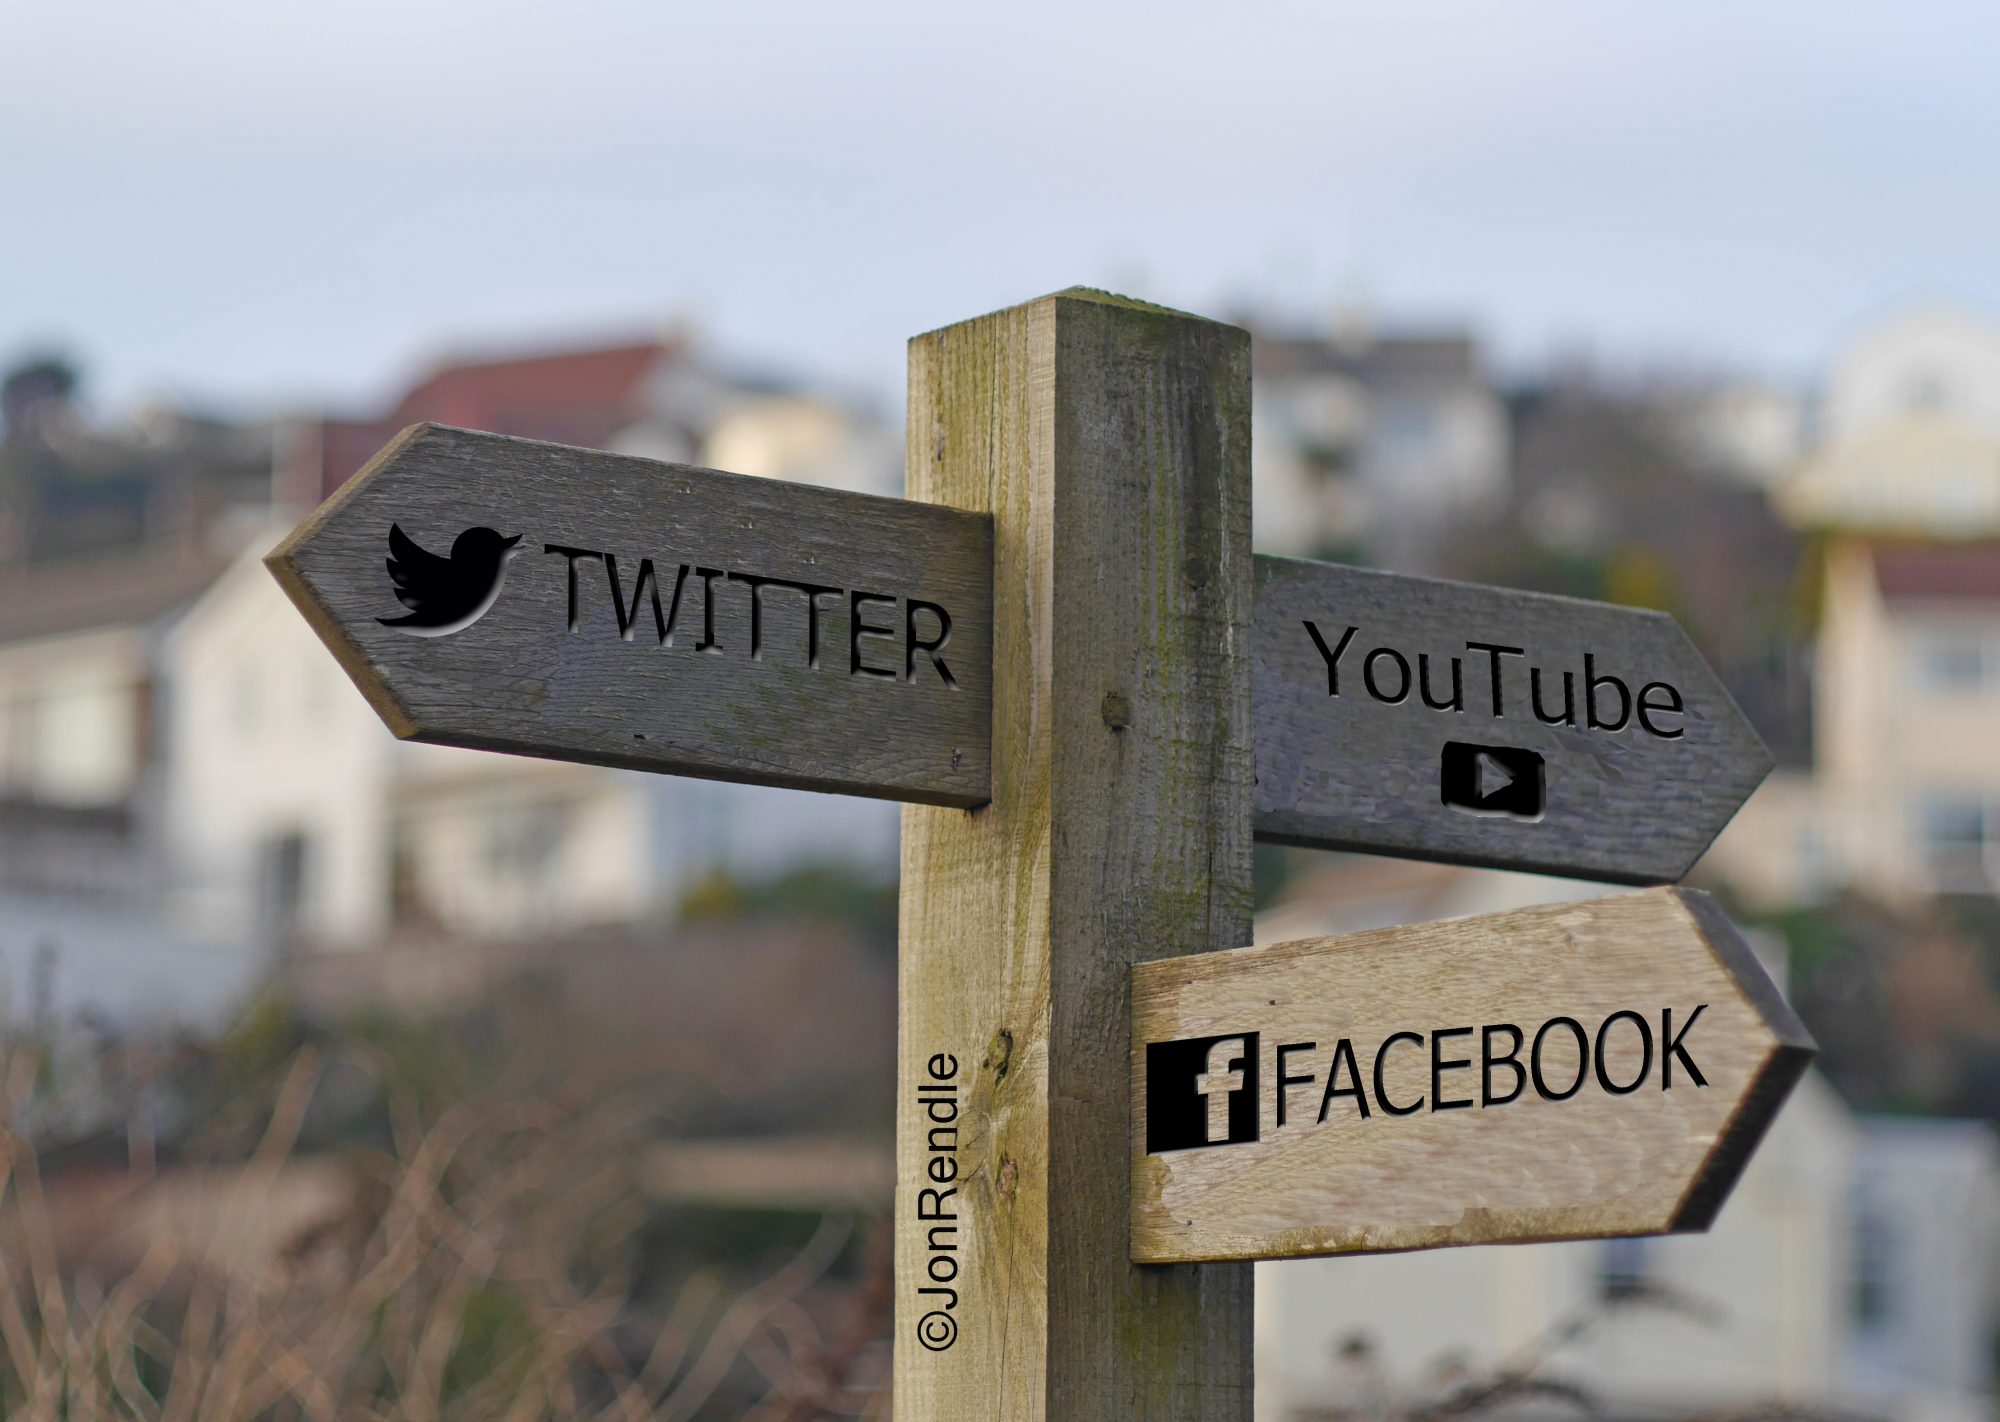 Bantham signpost with social media icons